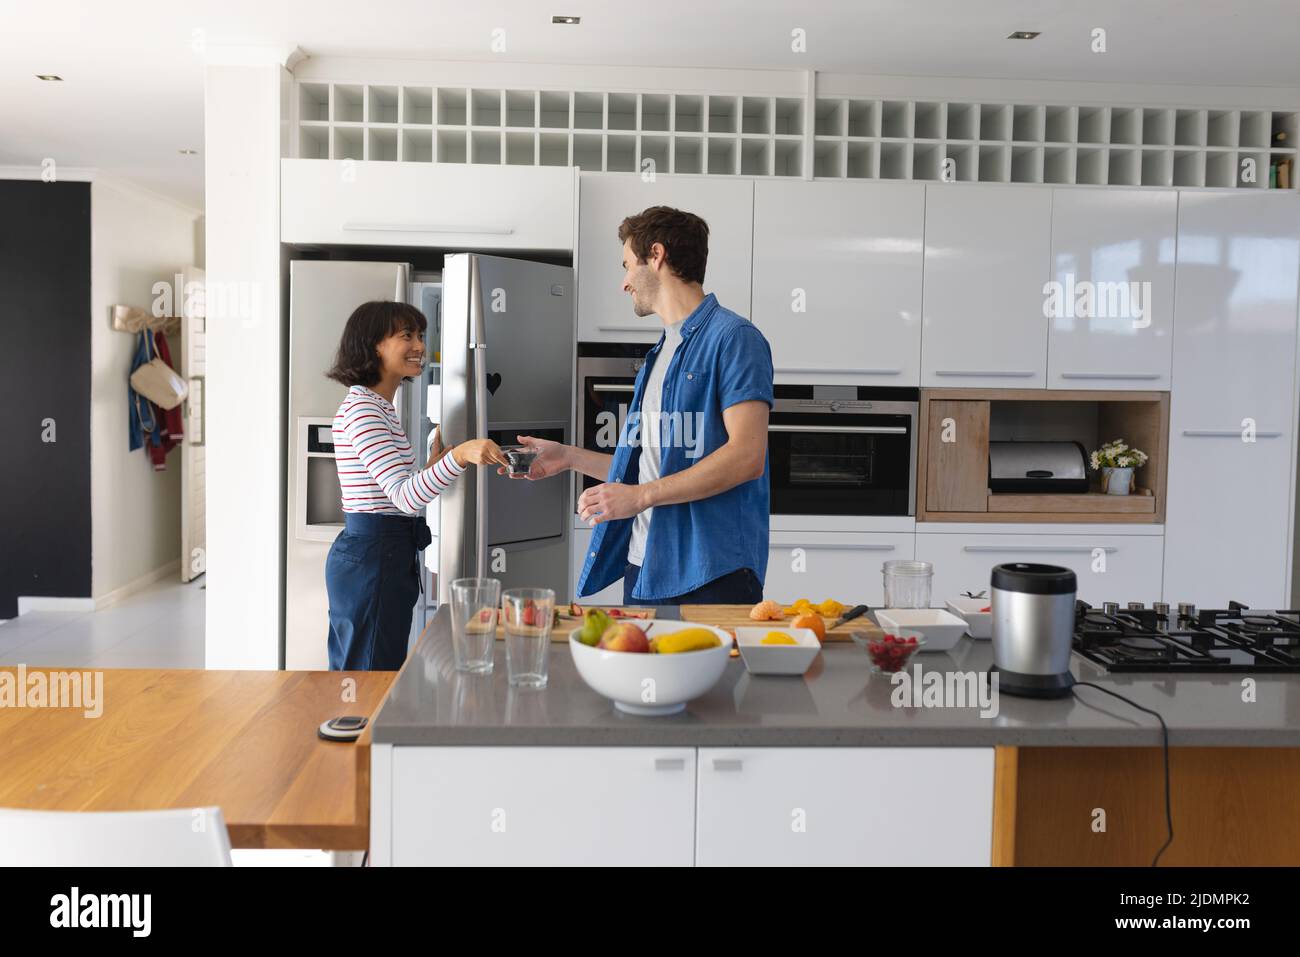 Asian girlfriend giving fruits from refrigerator to caucasian boyfriend making smoothie in kitchen Stock Photo